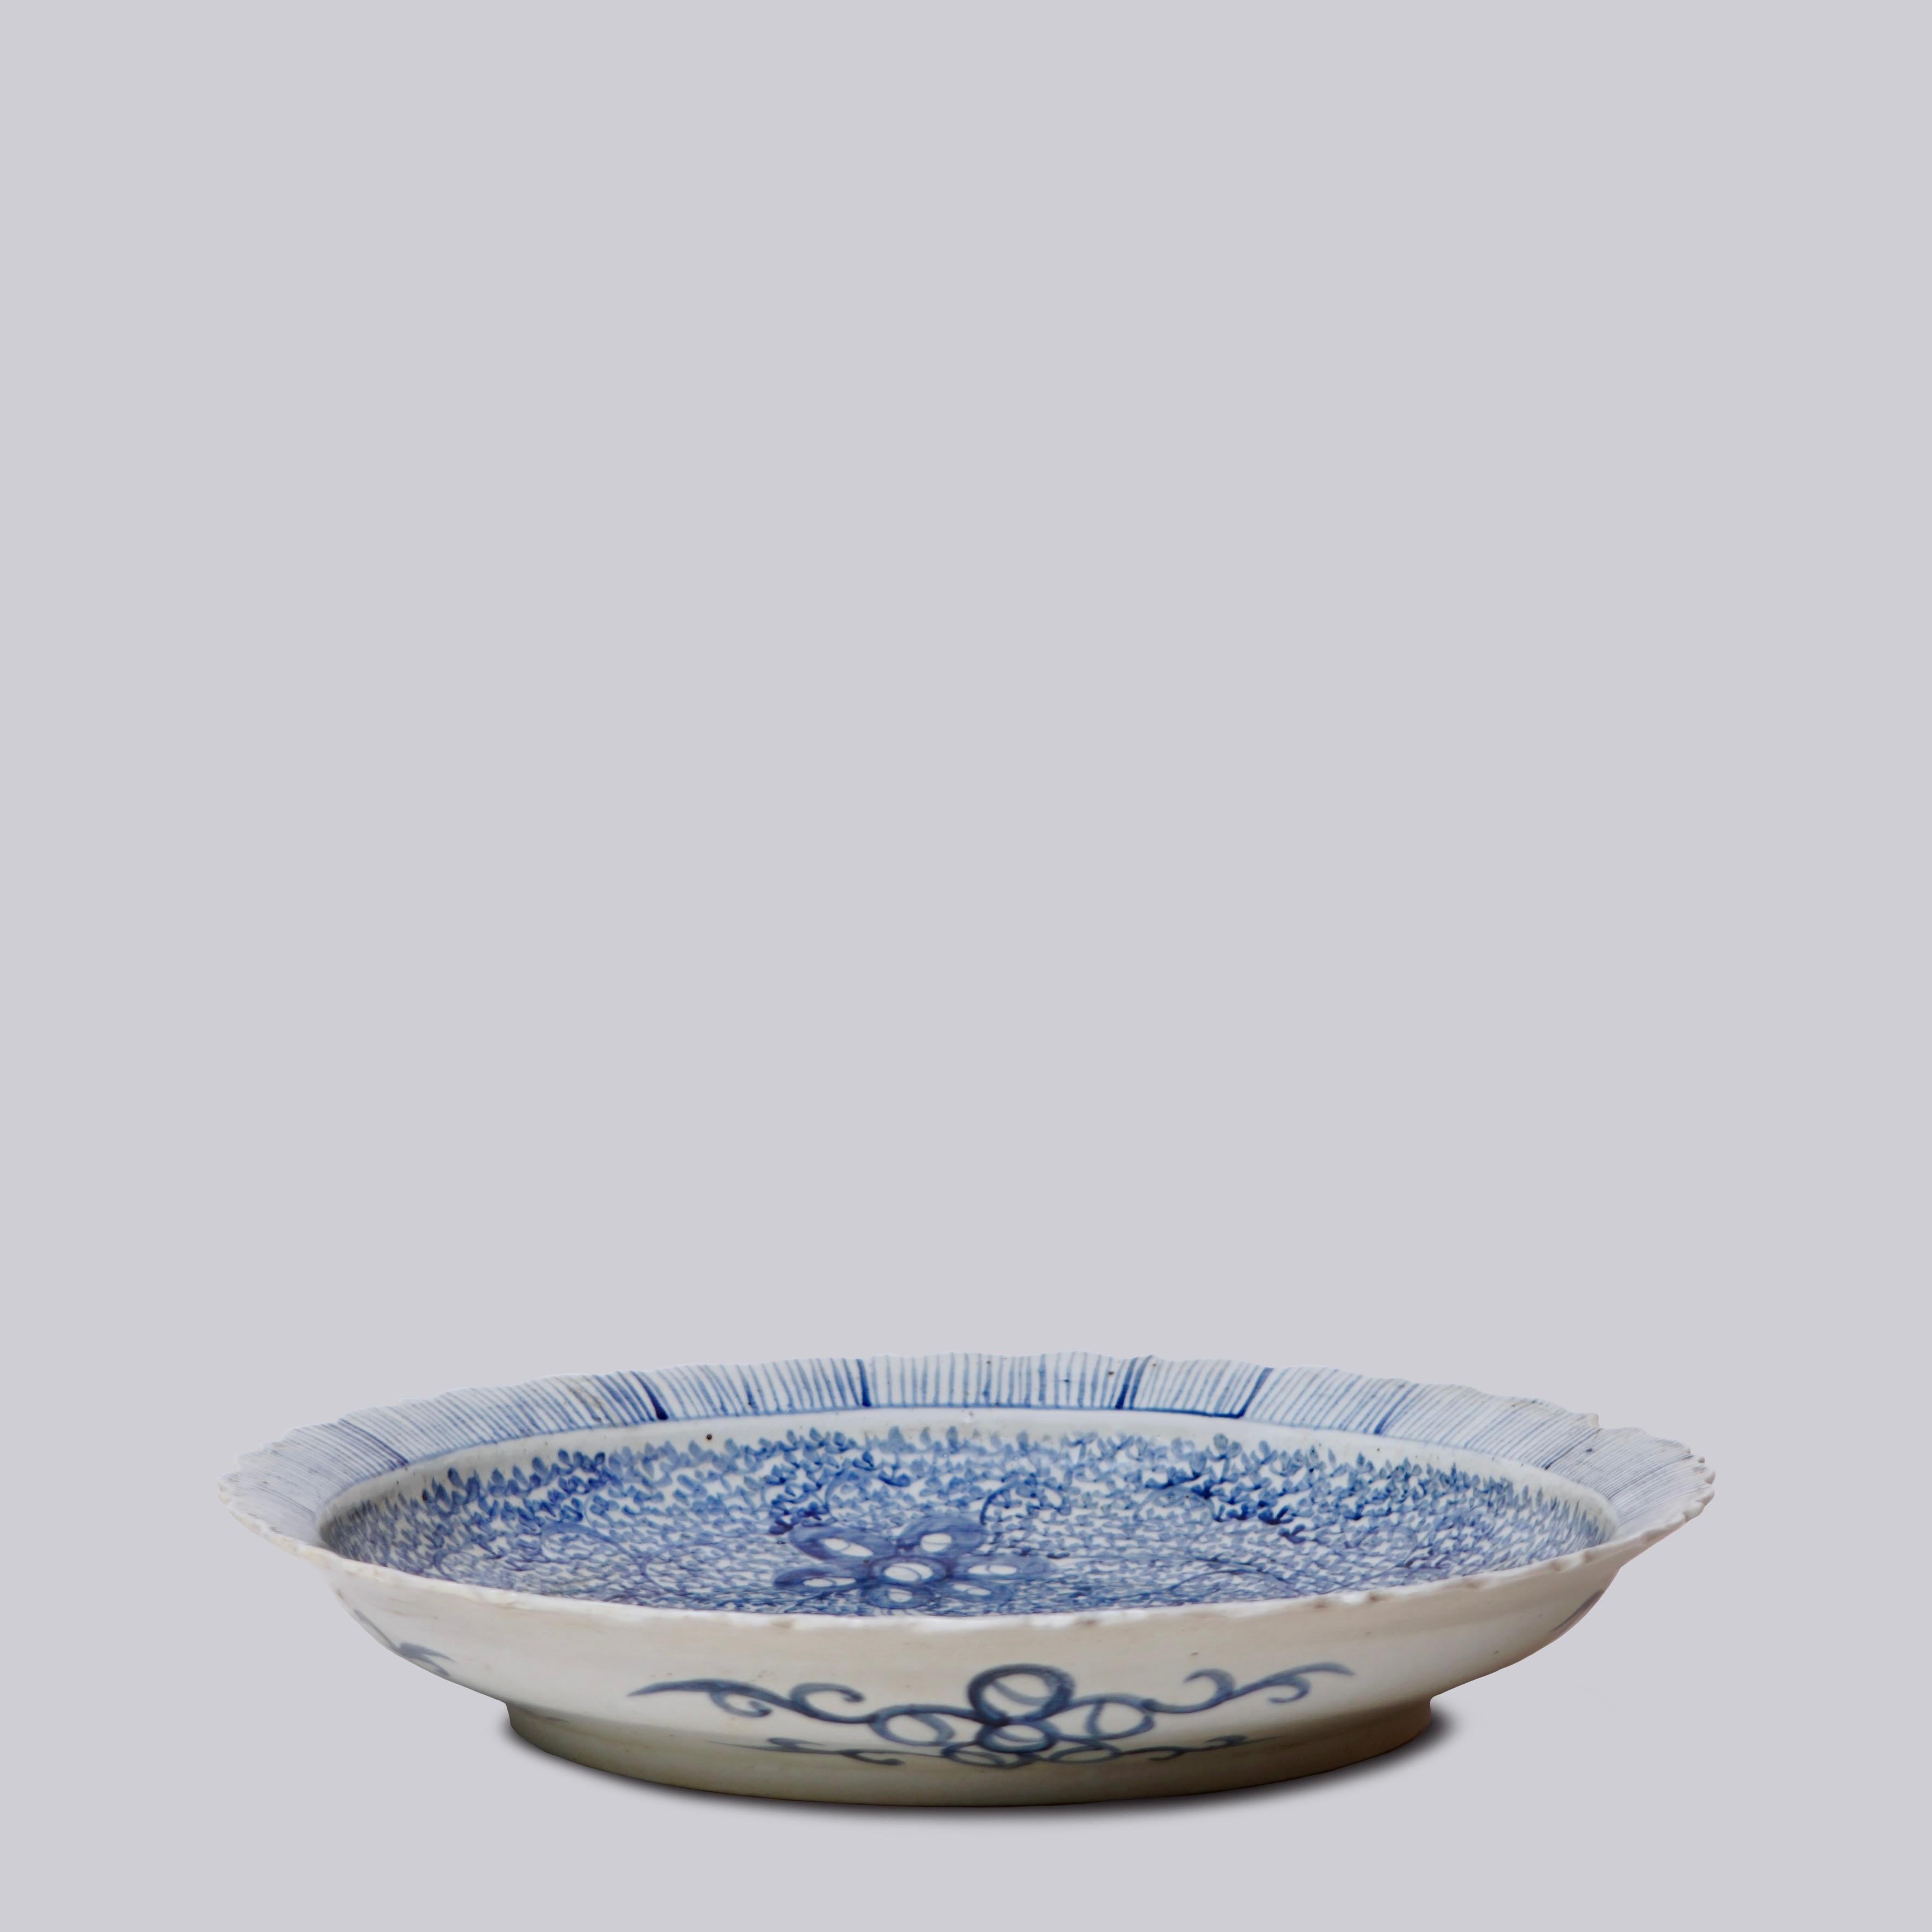 This platter is a traditional rustic style from Jingdezhen, a town long distinguished by imperial patronage. From the loose handpainted and slightly abstract design we can deduce that this piece was made for daily use in a casual home environment,